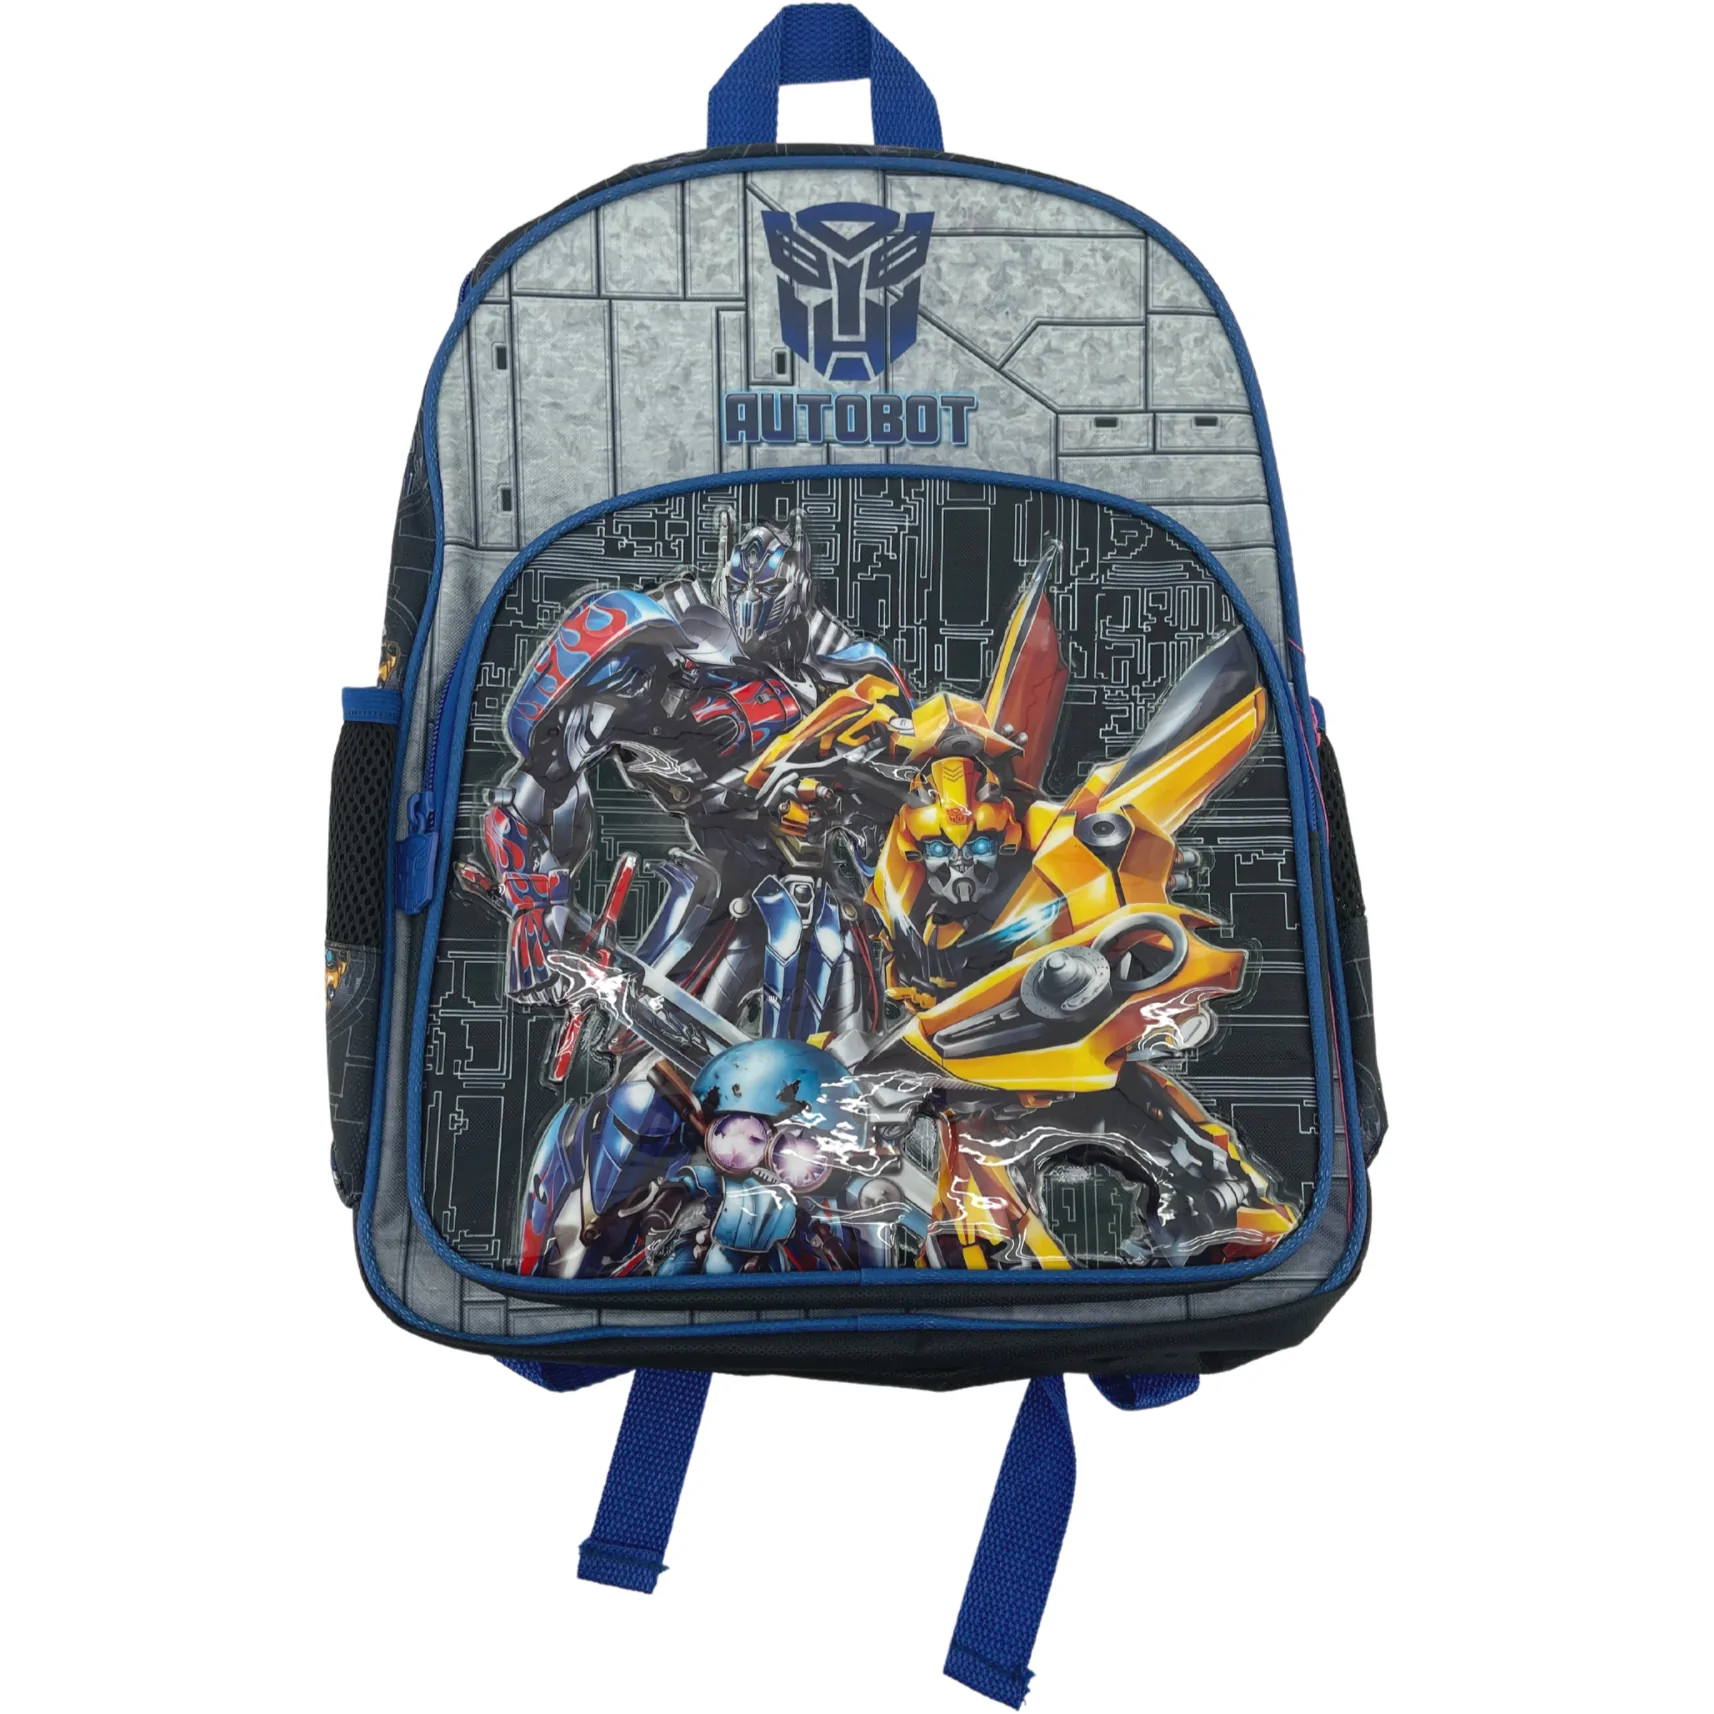 Heys Transformers Kid's Backpack / Autobot Themed Book Bag / Back to School / Blue & Grey